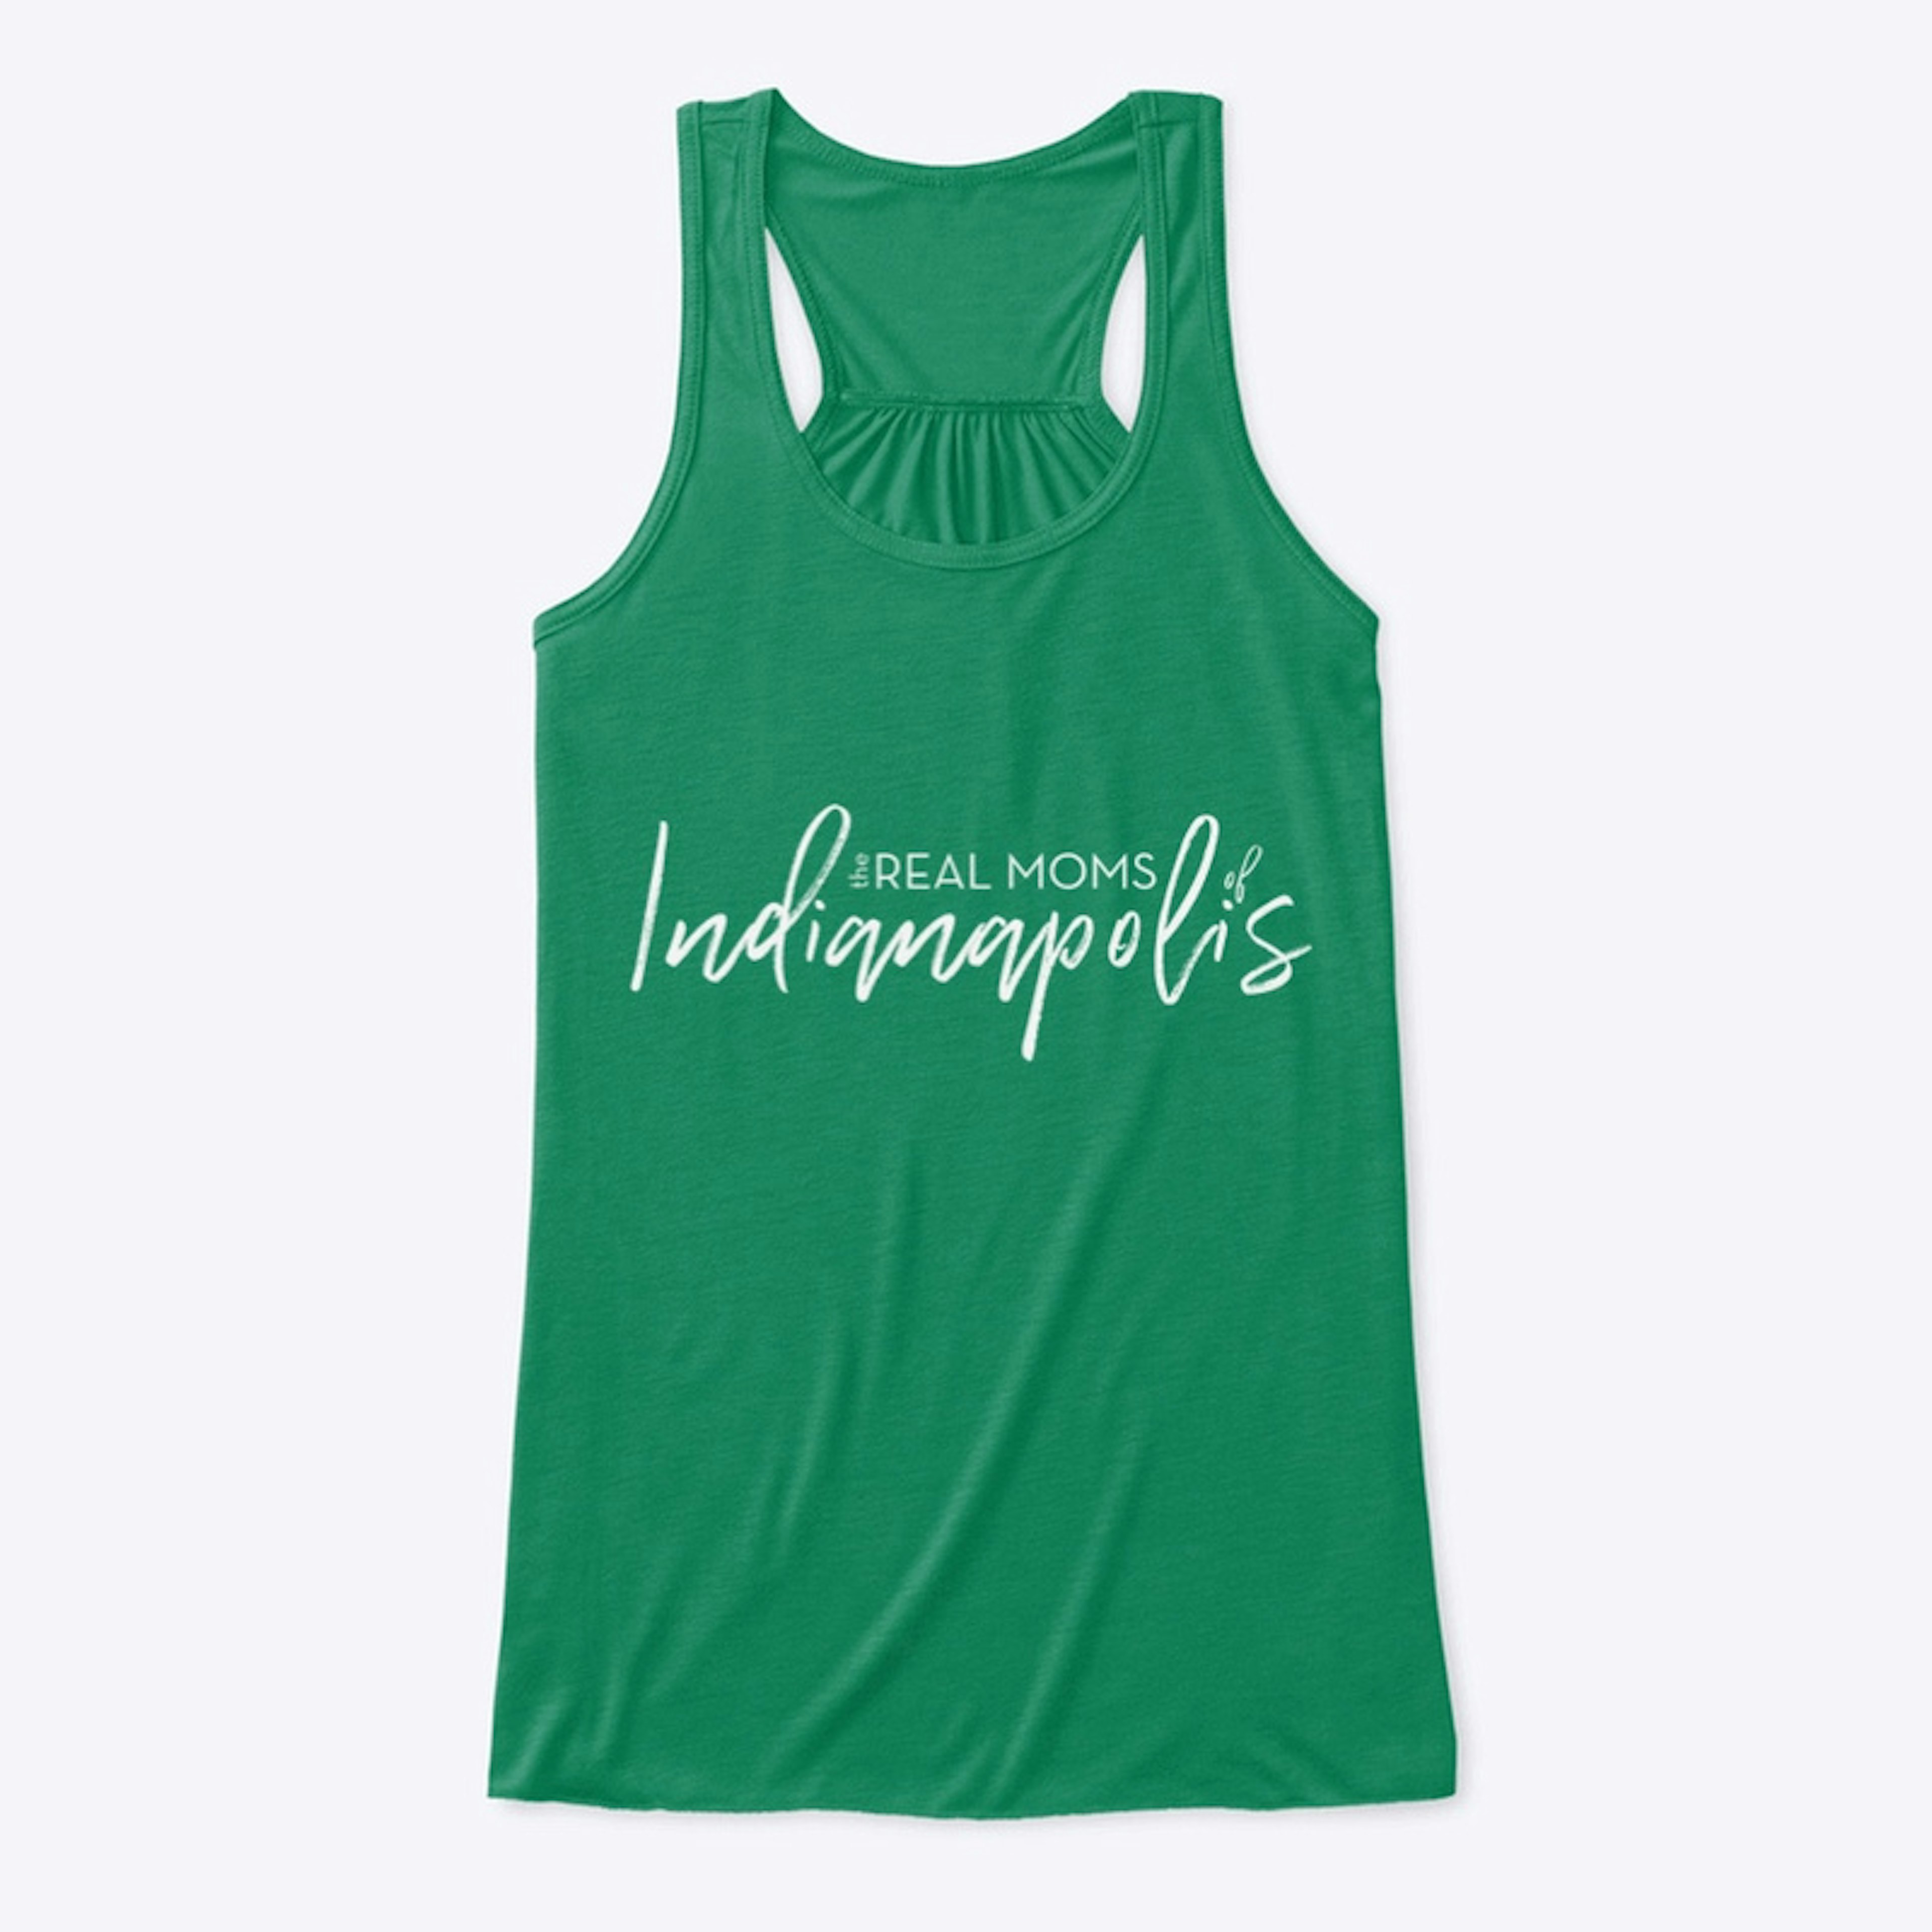 Real Moms of Indy Flowy Tank